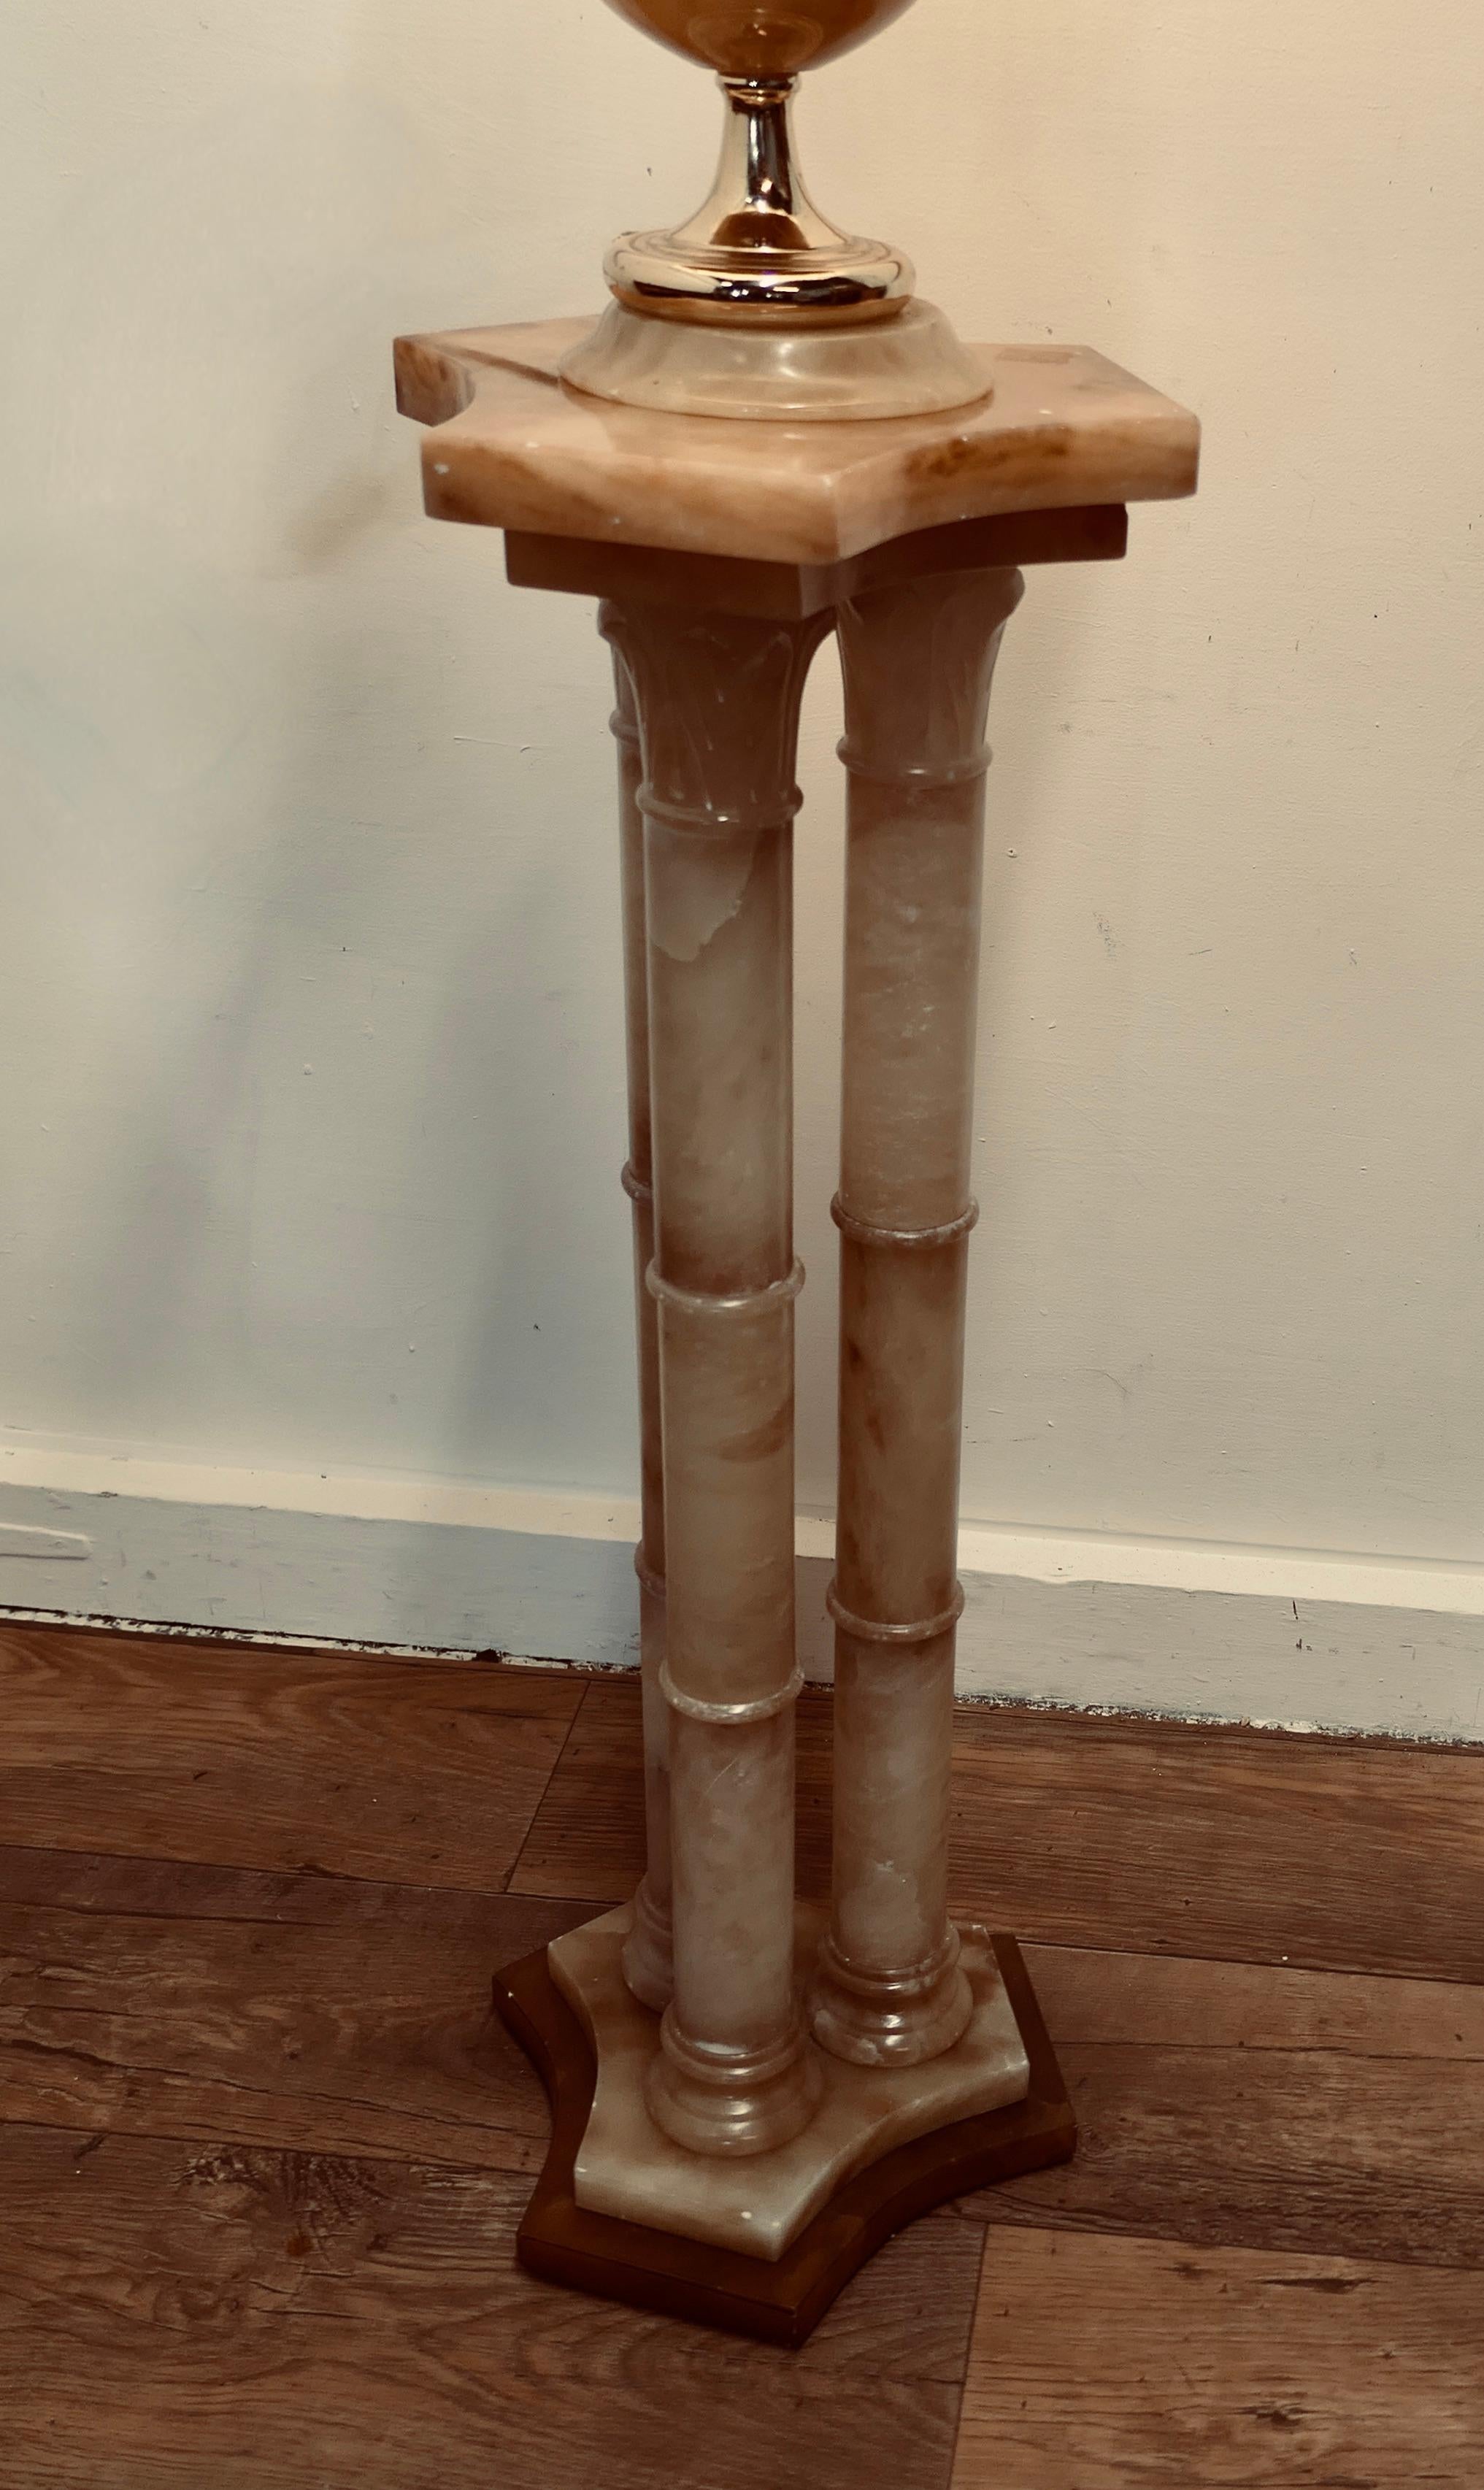 A Superb Italian Marble Column Lamp Set

A superb set in Honey coloured pallet, the column has a triple column upright, the lamp has a baluster shape and the set is topped off with a superb hand made beaded silk shade 
A Truly stunning set, the